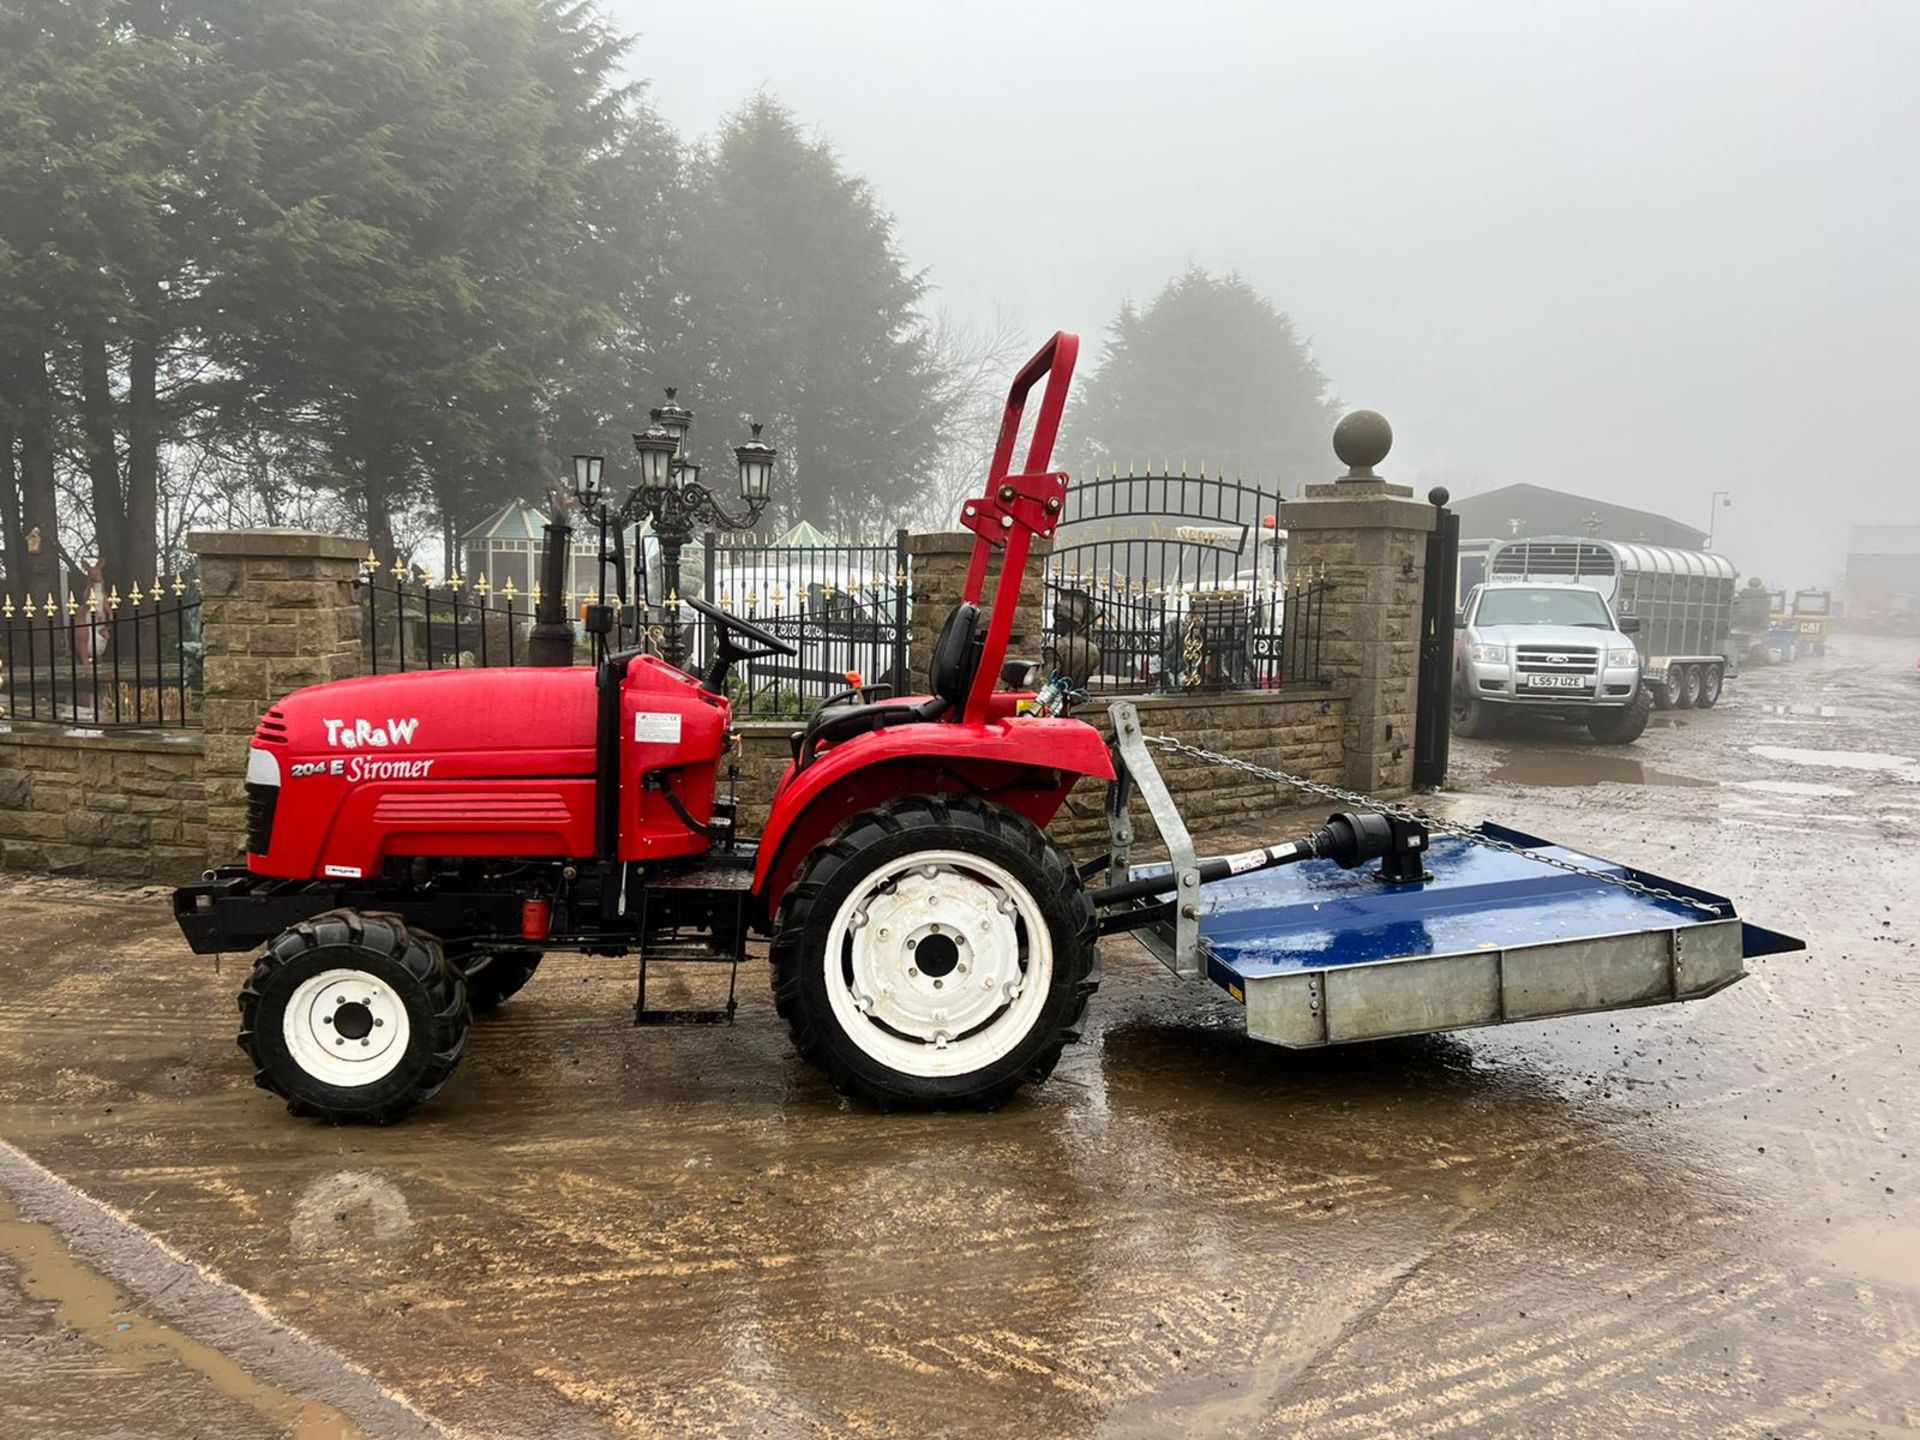 SIROMER 204E 20hp 4WD COMPACT TRACTOR WITH TOPPER, RUNS DRIVES AND CUTS, 326 HOURS *PLUS VAT* - Image 3 of 15